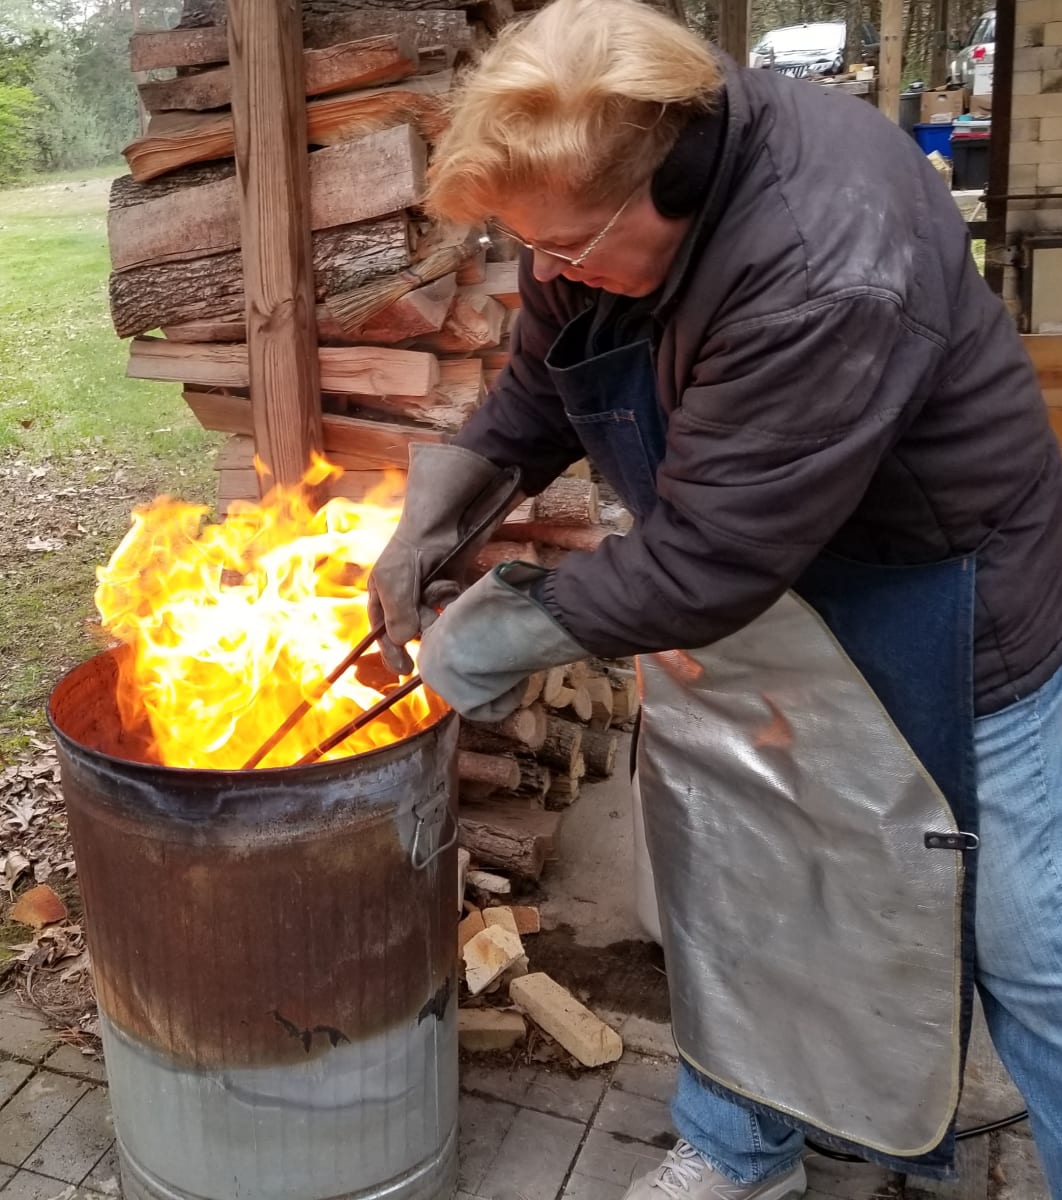 Lillian Rubin Crackle Glaze Raku Experience by Lillian Rubin  Image: Get your group together for an amazing experience!